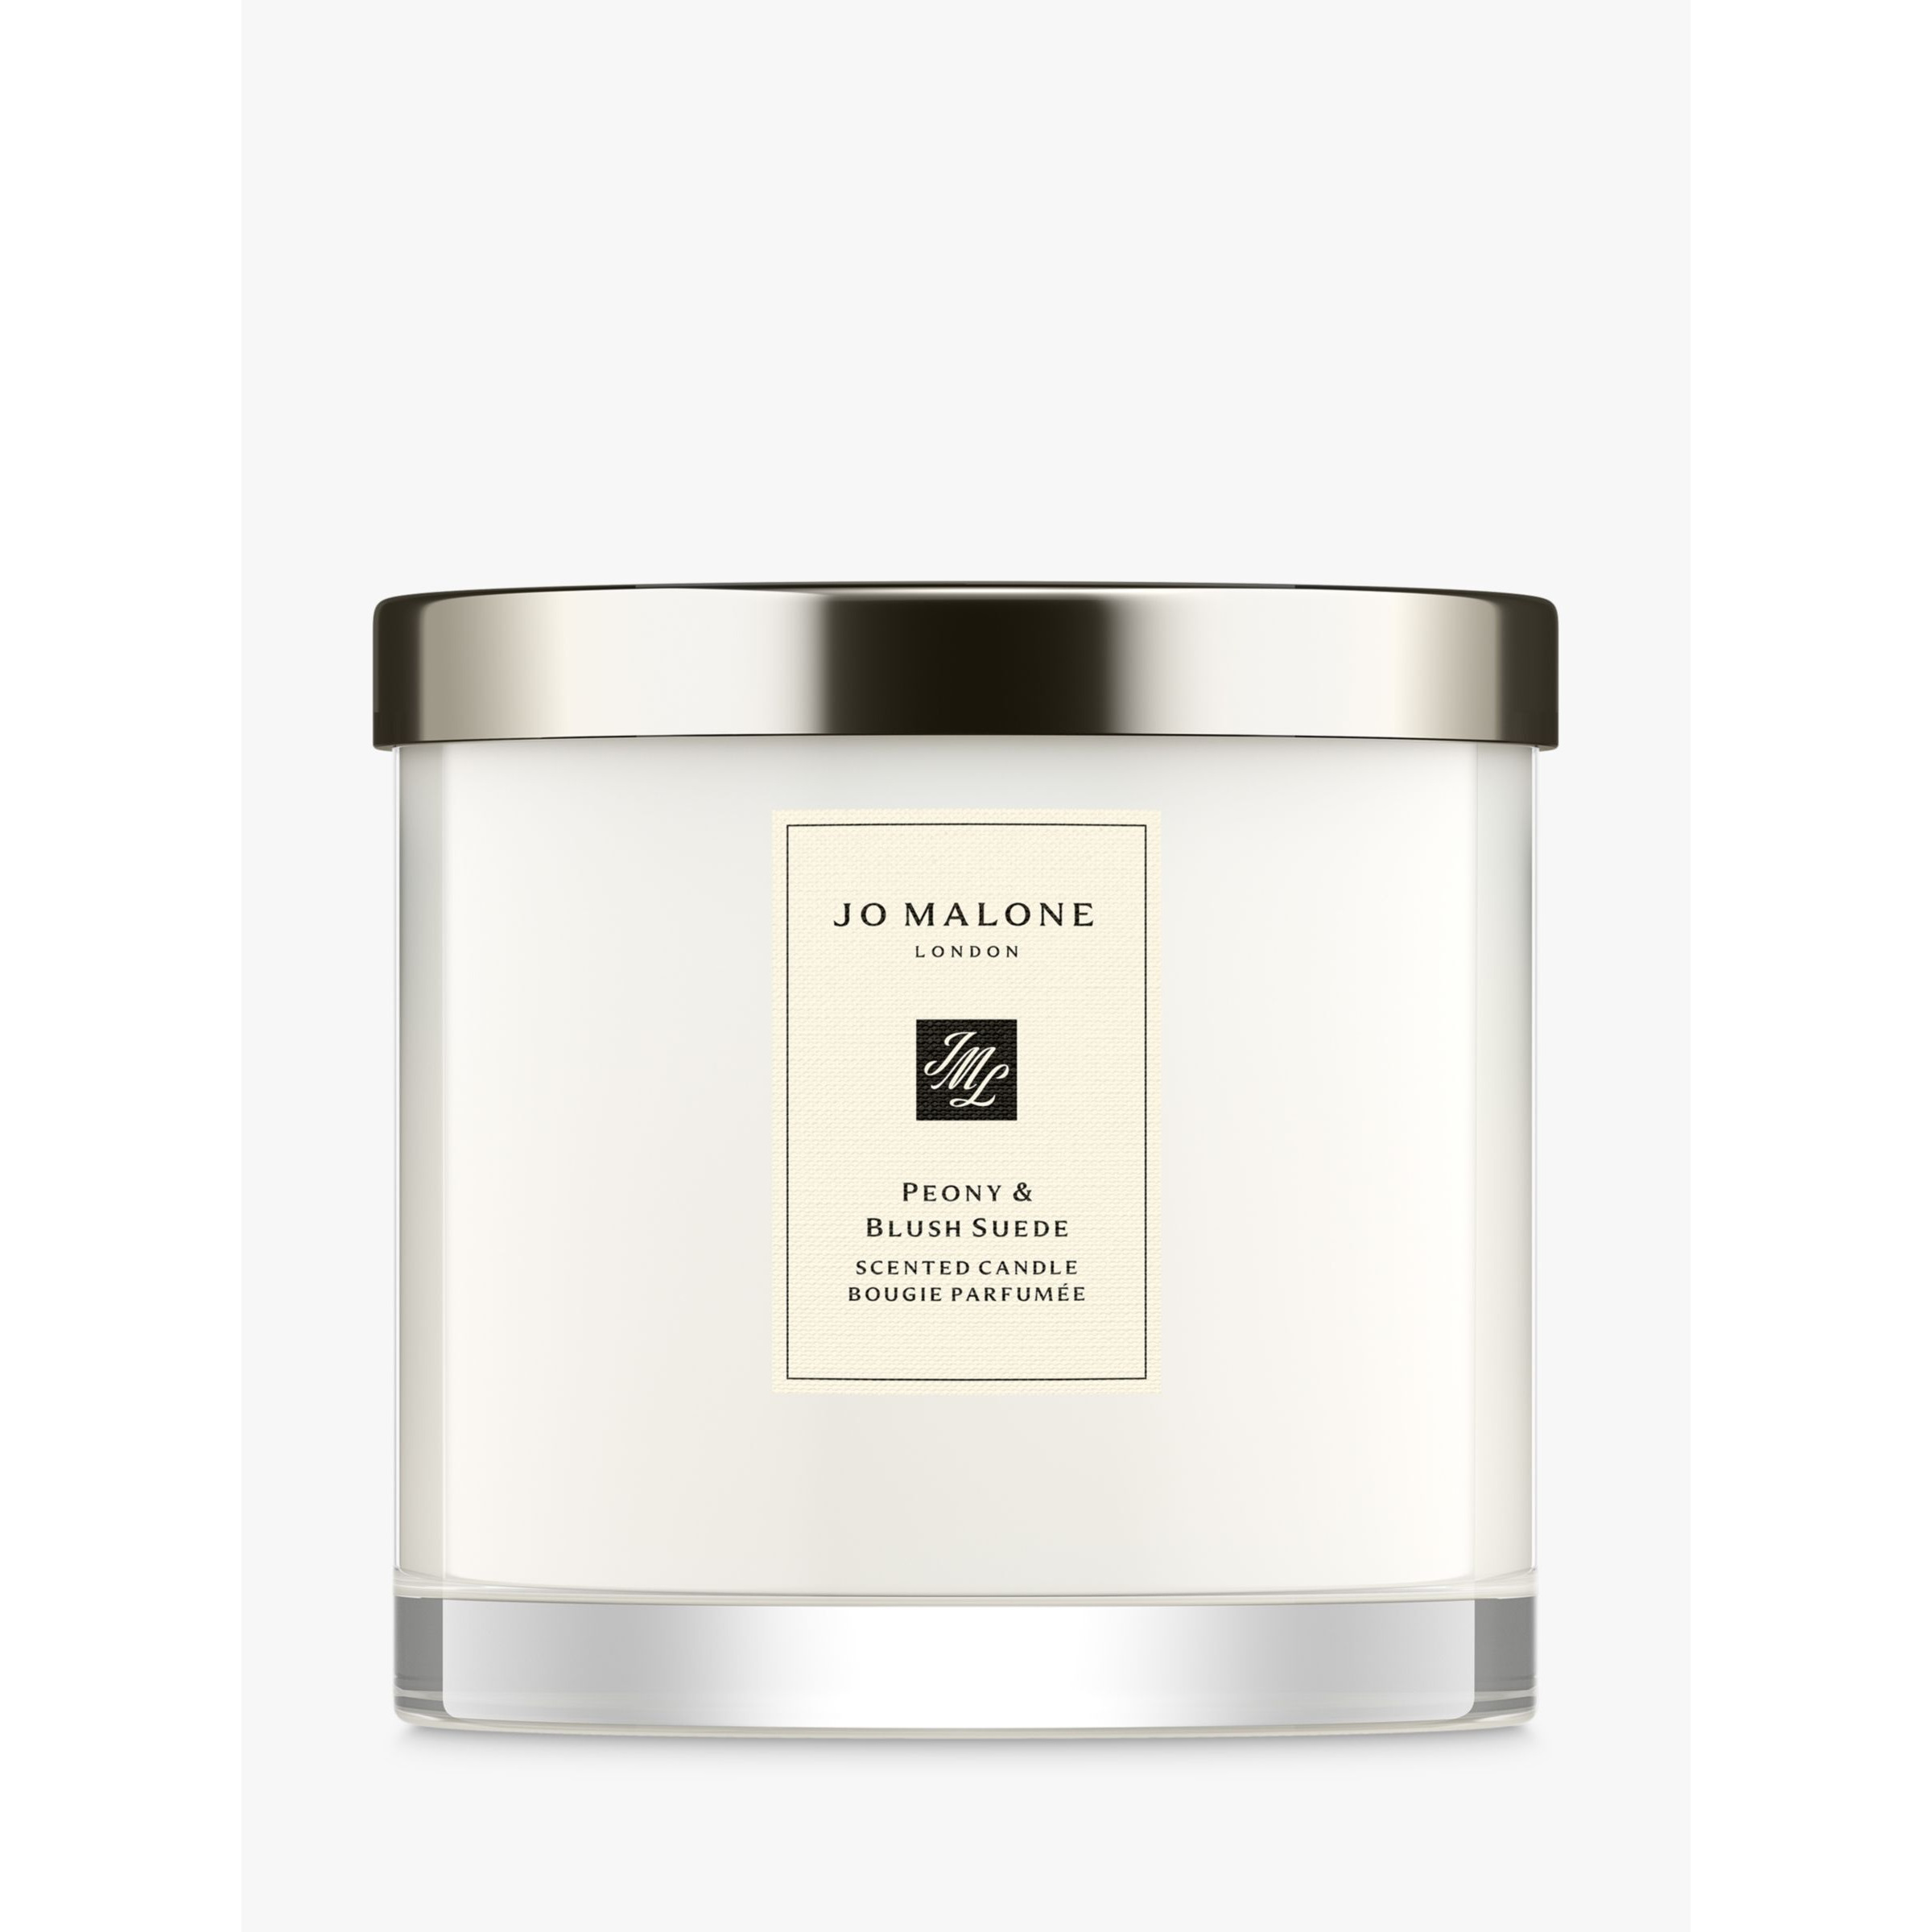 Jo Malone London Peony & Blush Suede Scented Candle - image 1